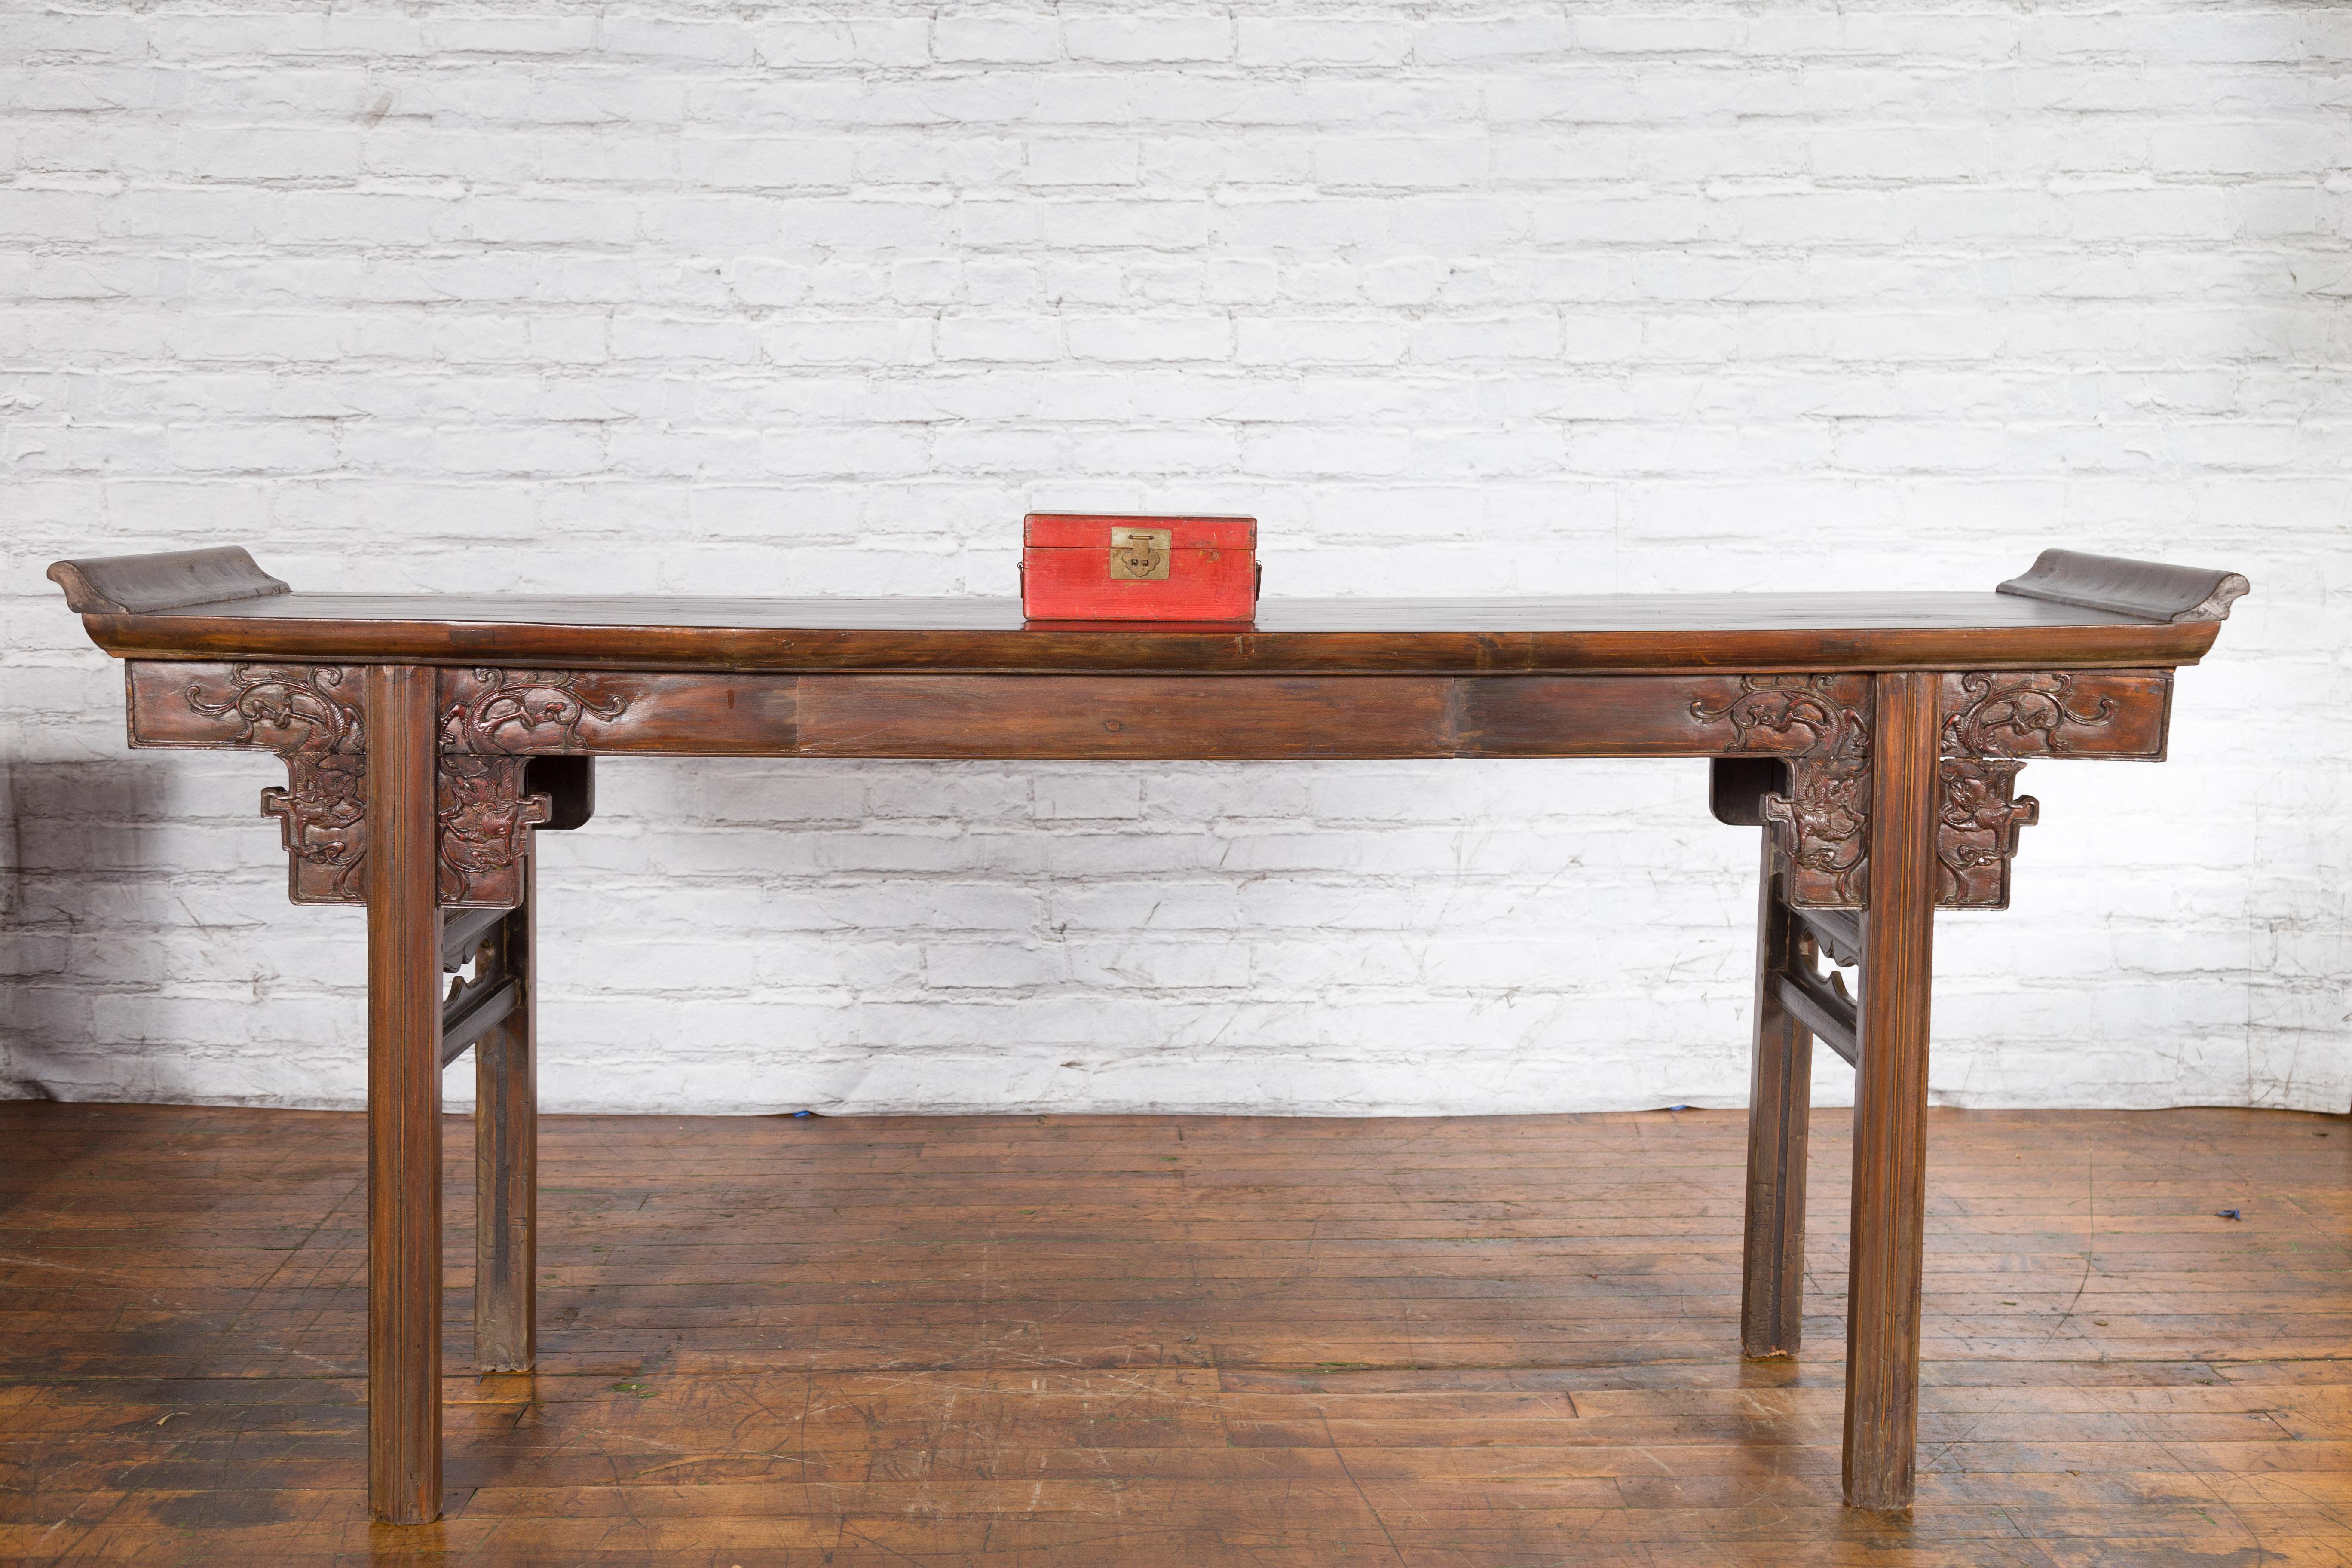 20th Century Chinese Vintage Red Lacquered Document Box with Brass Hardware